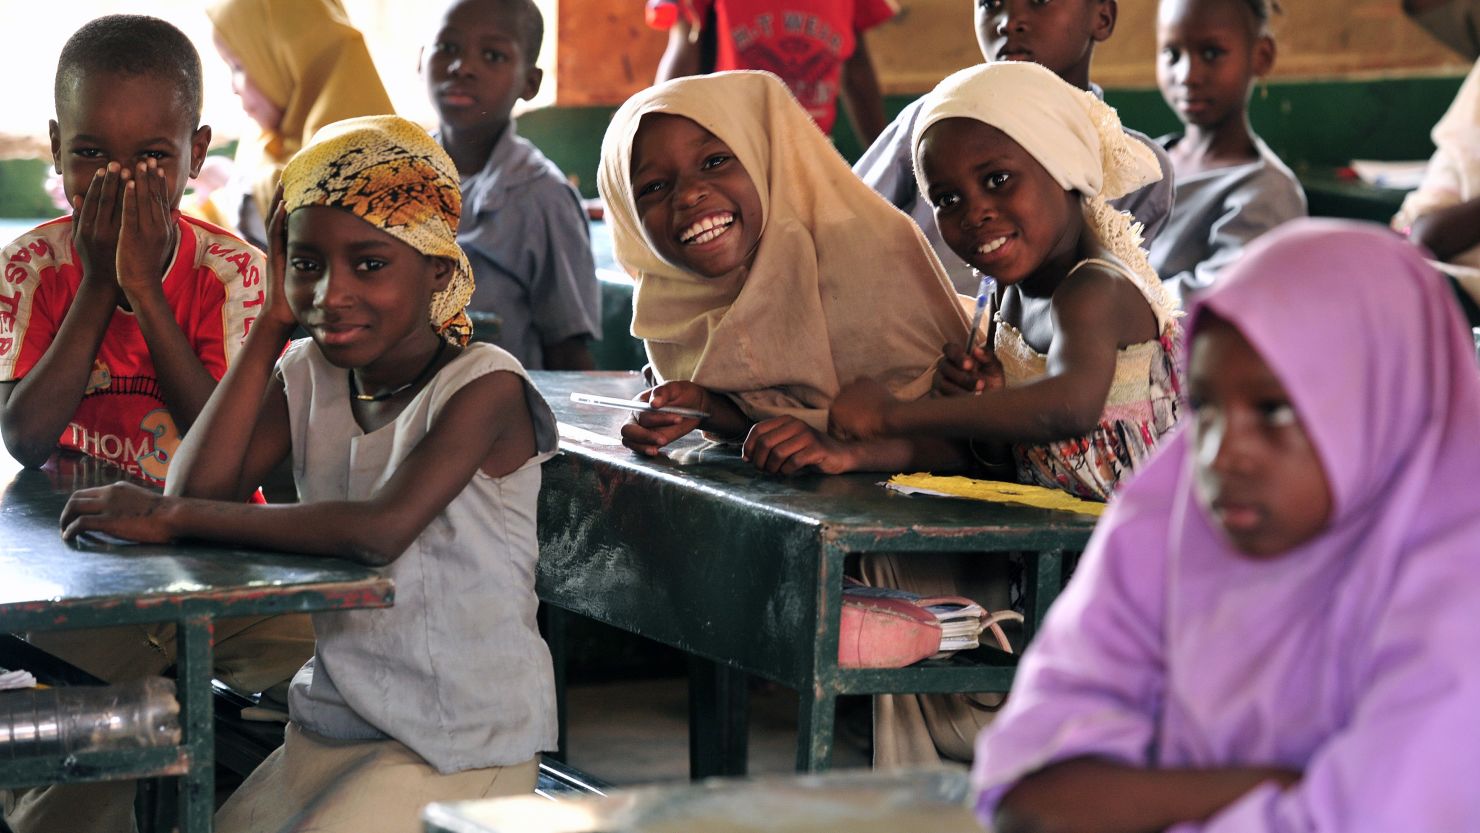 Children pose in a classroom at the Friendship Primary school in Zinder, Niger, on June 1, 2012. 